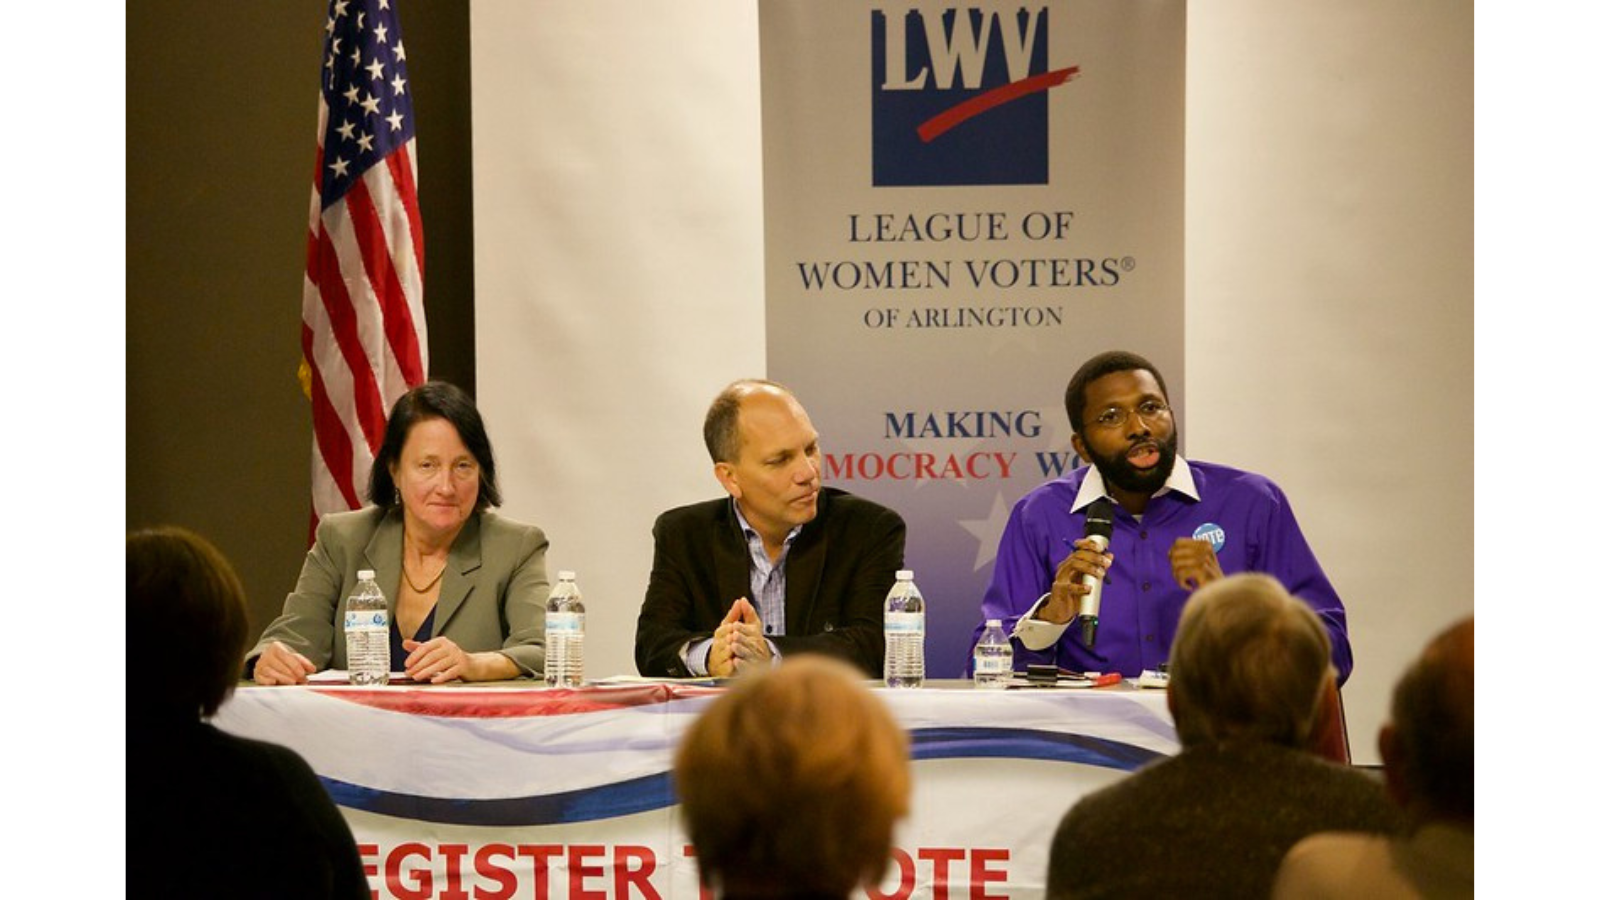 Three candidates are sitting behind a desk at a candidate forum. Behind the candidates is an American flag (left) and League of Women Voters of Arlington vertical banner. The banner has the blue box LWV logo and says: LEAGUE OF WOMEN VOTERS OF ARLINGTON in blue text. Below that is the text: MAKING DEMOCRACY WORK. One of the three candidates is wearing a purple shirt and speaking into a microphone to the audience.